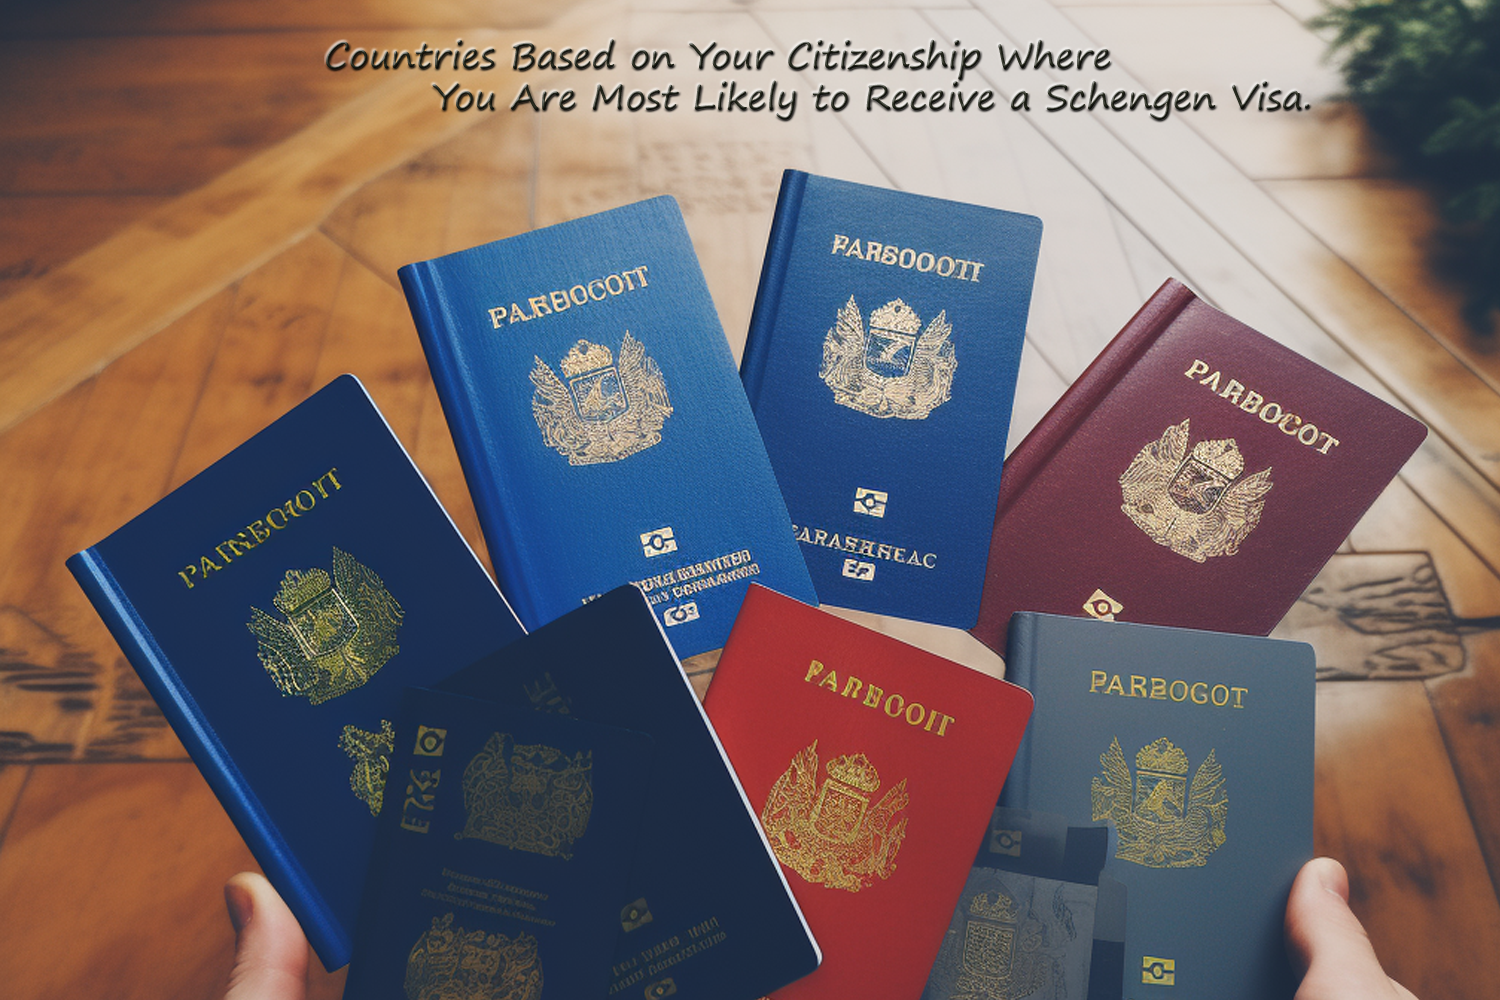 Countries Based on Your Citizenship Where You Are Most Likely to Receive a Schengen Visa.